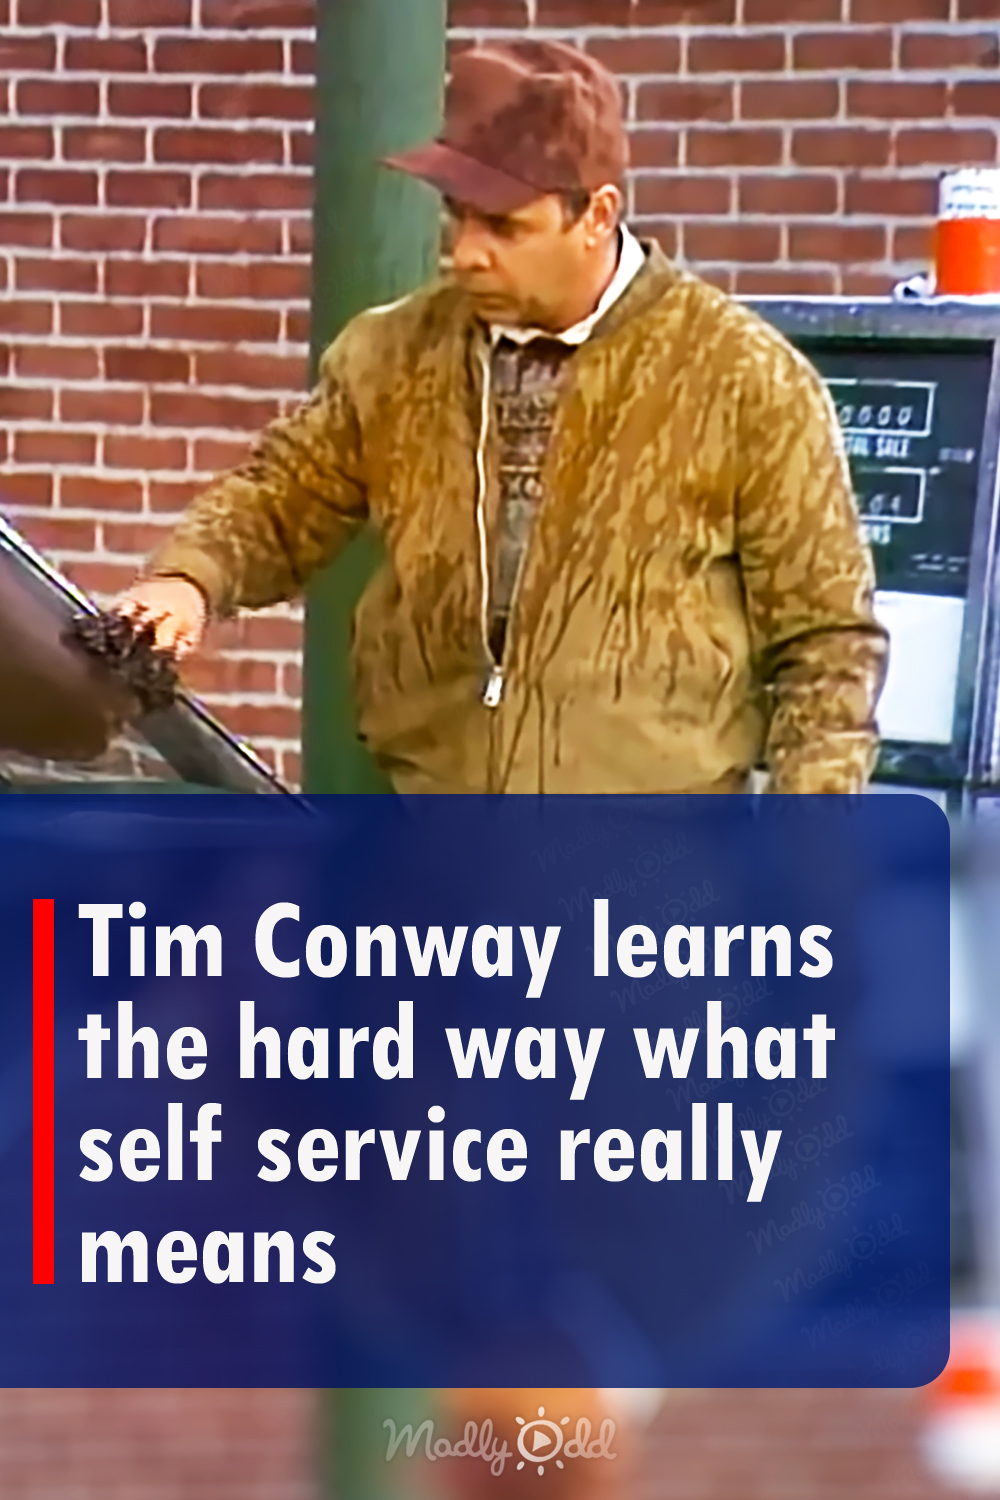 Tim Conway learns the hard way what self service really means